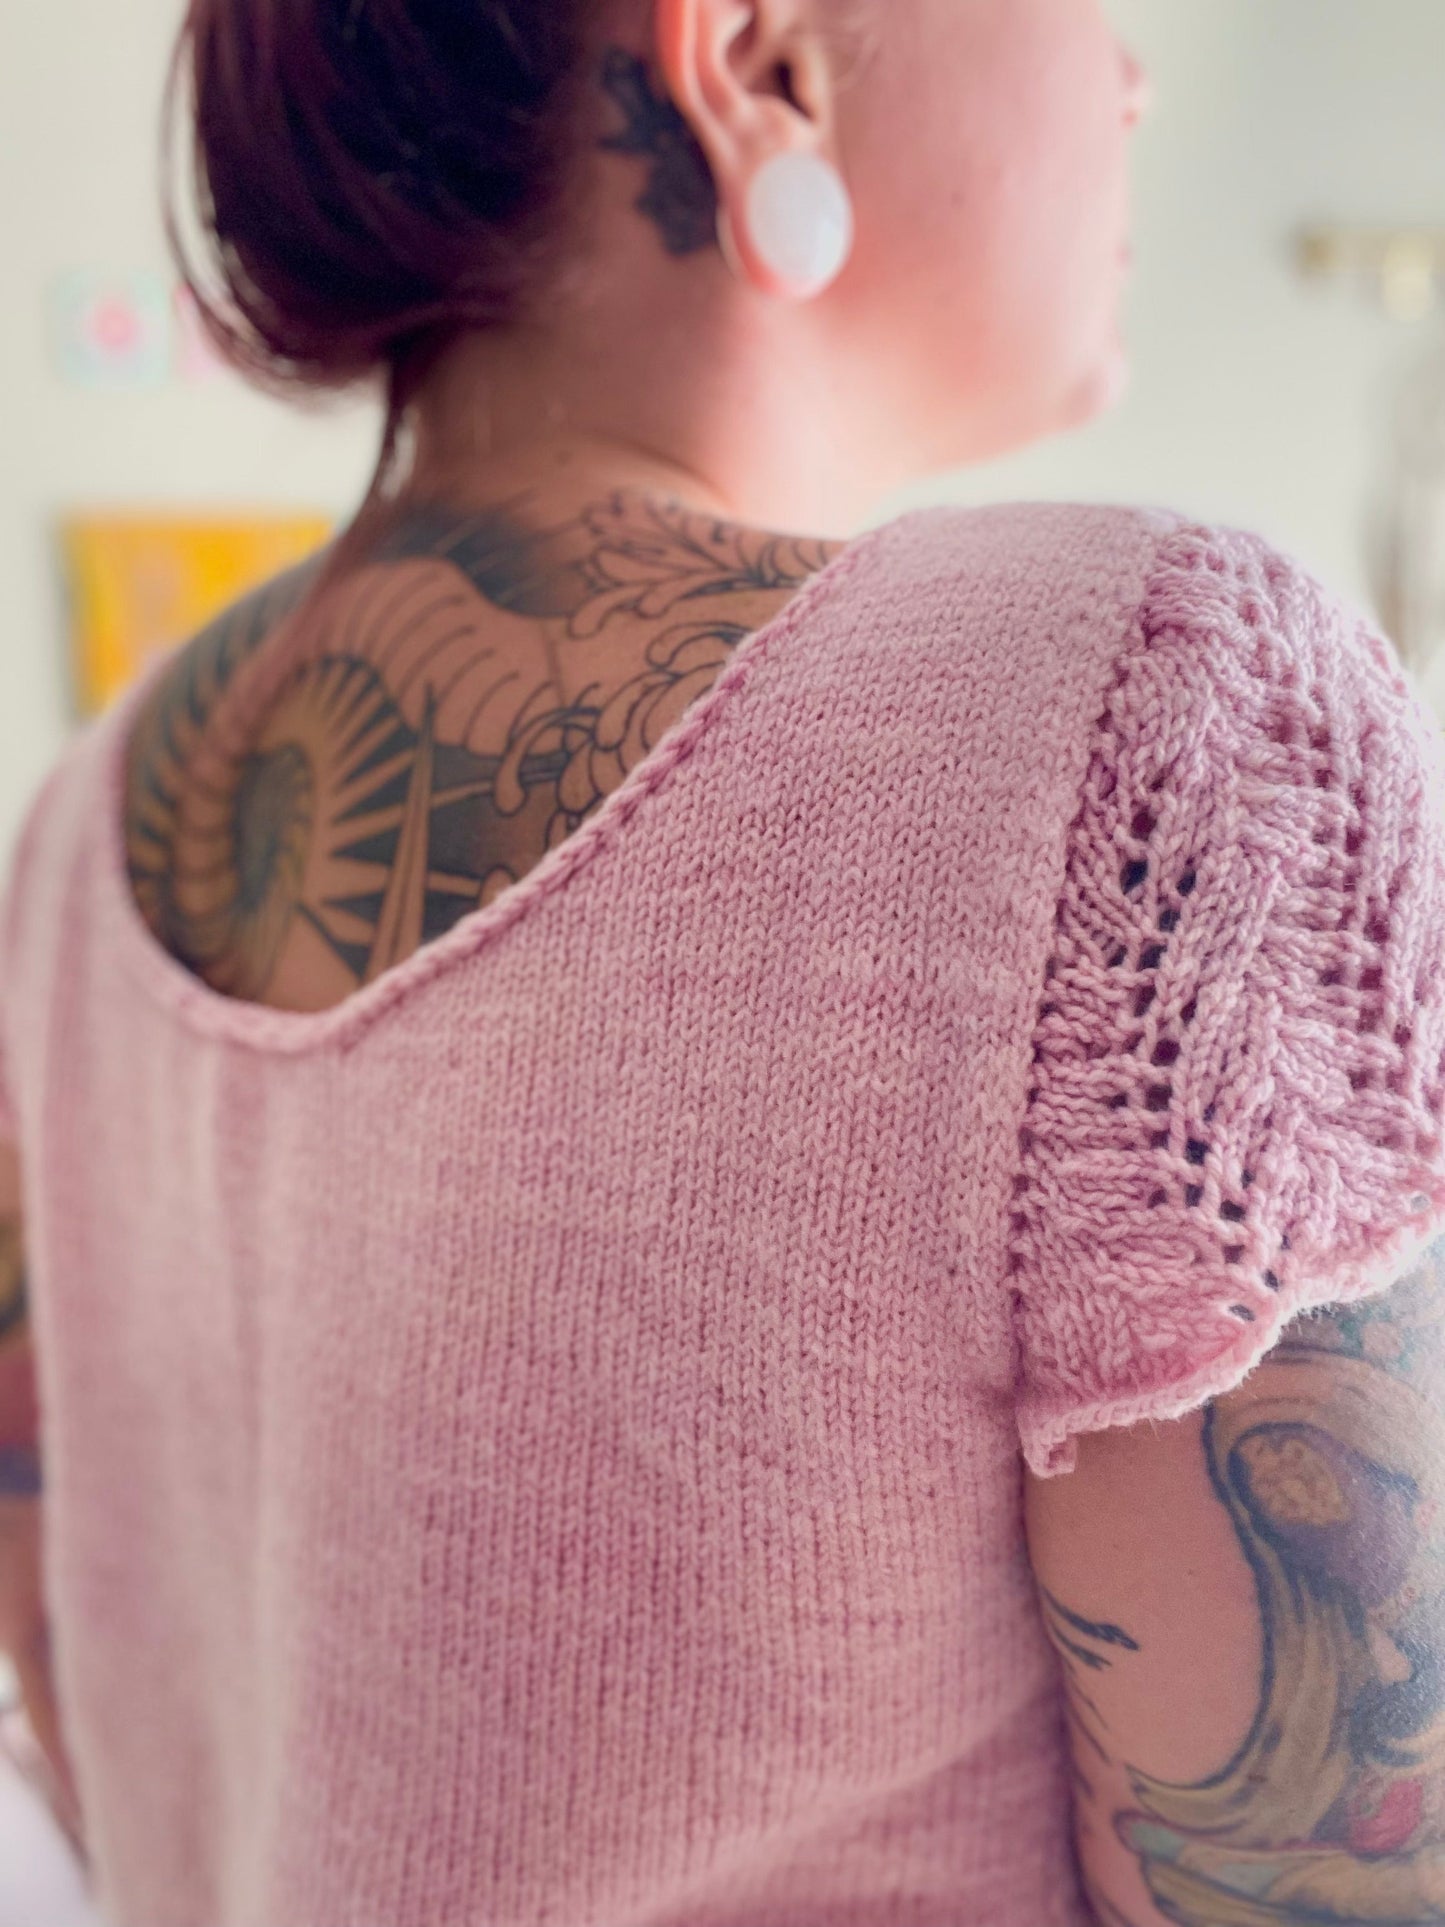 A close up shot of a hand knit pink t-shirt with lace cap sleeves and a scooping back neckline. The white woman wearing the tee has her pink hair in a bun revealing a sprawling back tattoo.